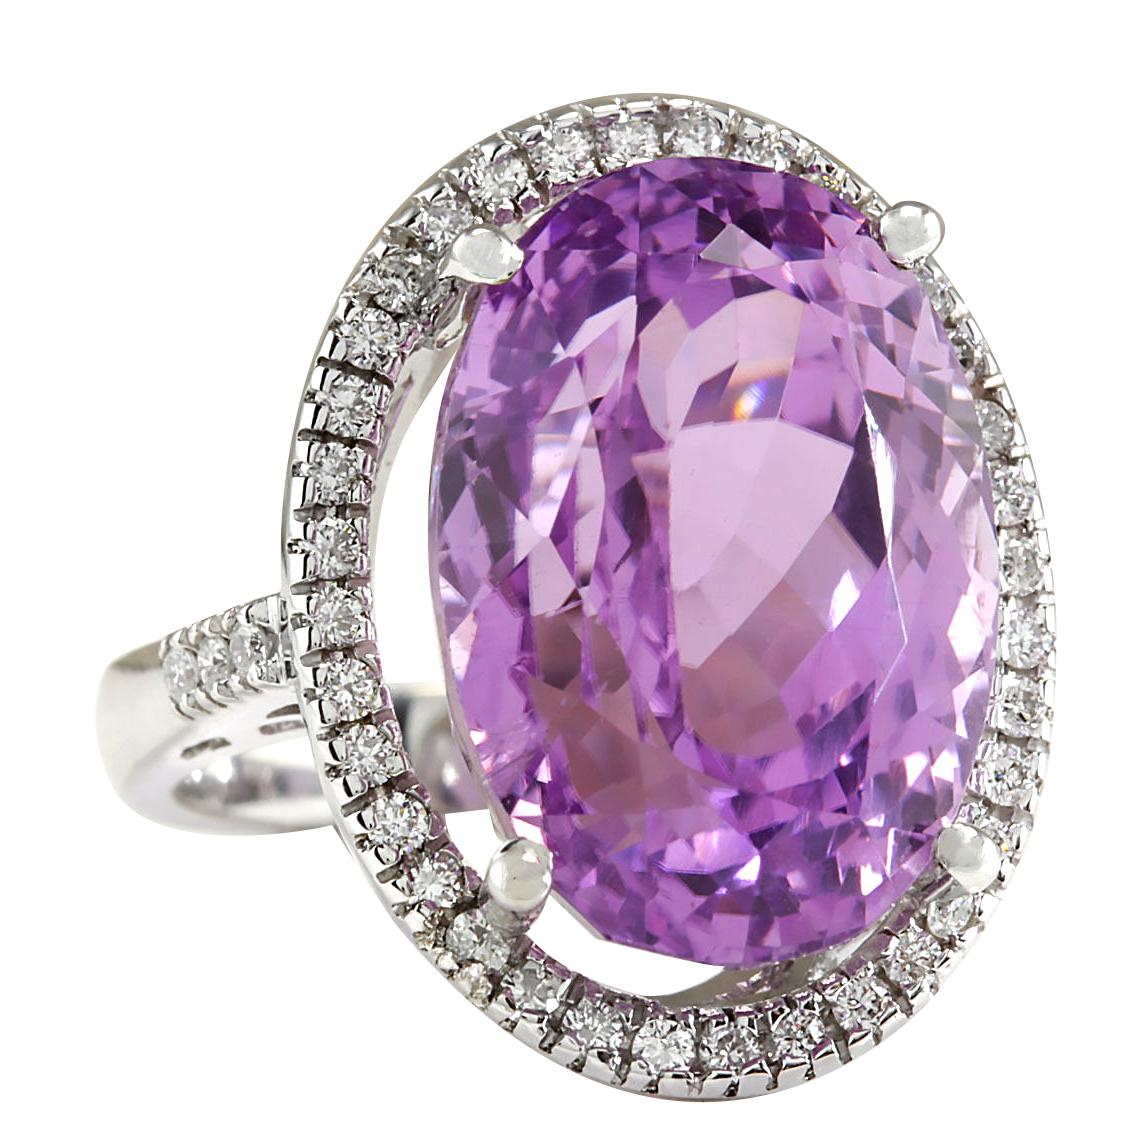 Stamped: 14K White Gold
Total Ring Weight: 14.0 Grams
Total Natural Kunzite Weight is 25.88 Carat (Measures: 18.00x13.00 mm)
Color: Pink
Total Natural Diamond Weight is 0.80 Carat
Color: F-G, Clarity: VS2-SI1
Face Measures: 24.55x19.10 mm
Sku: